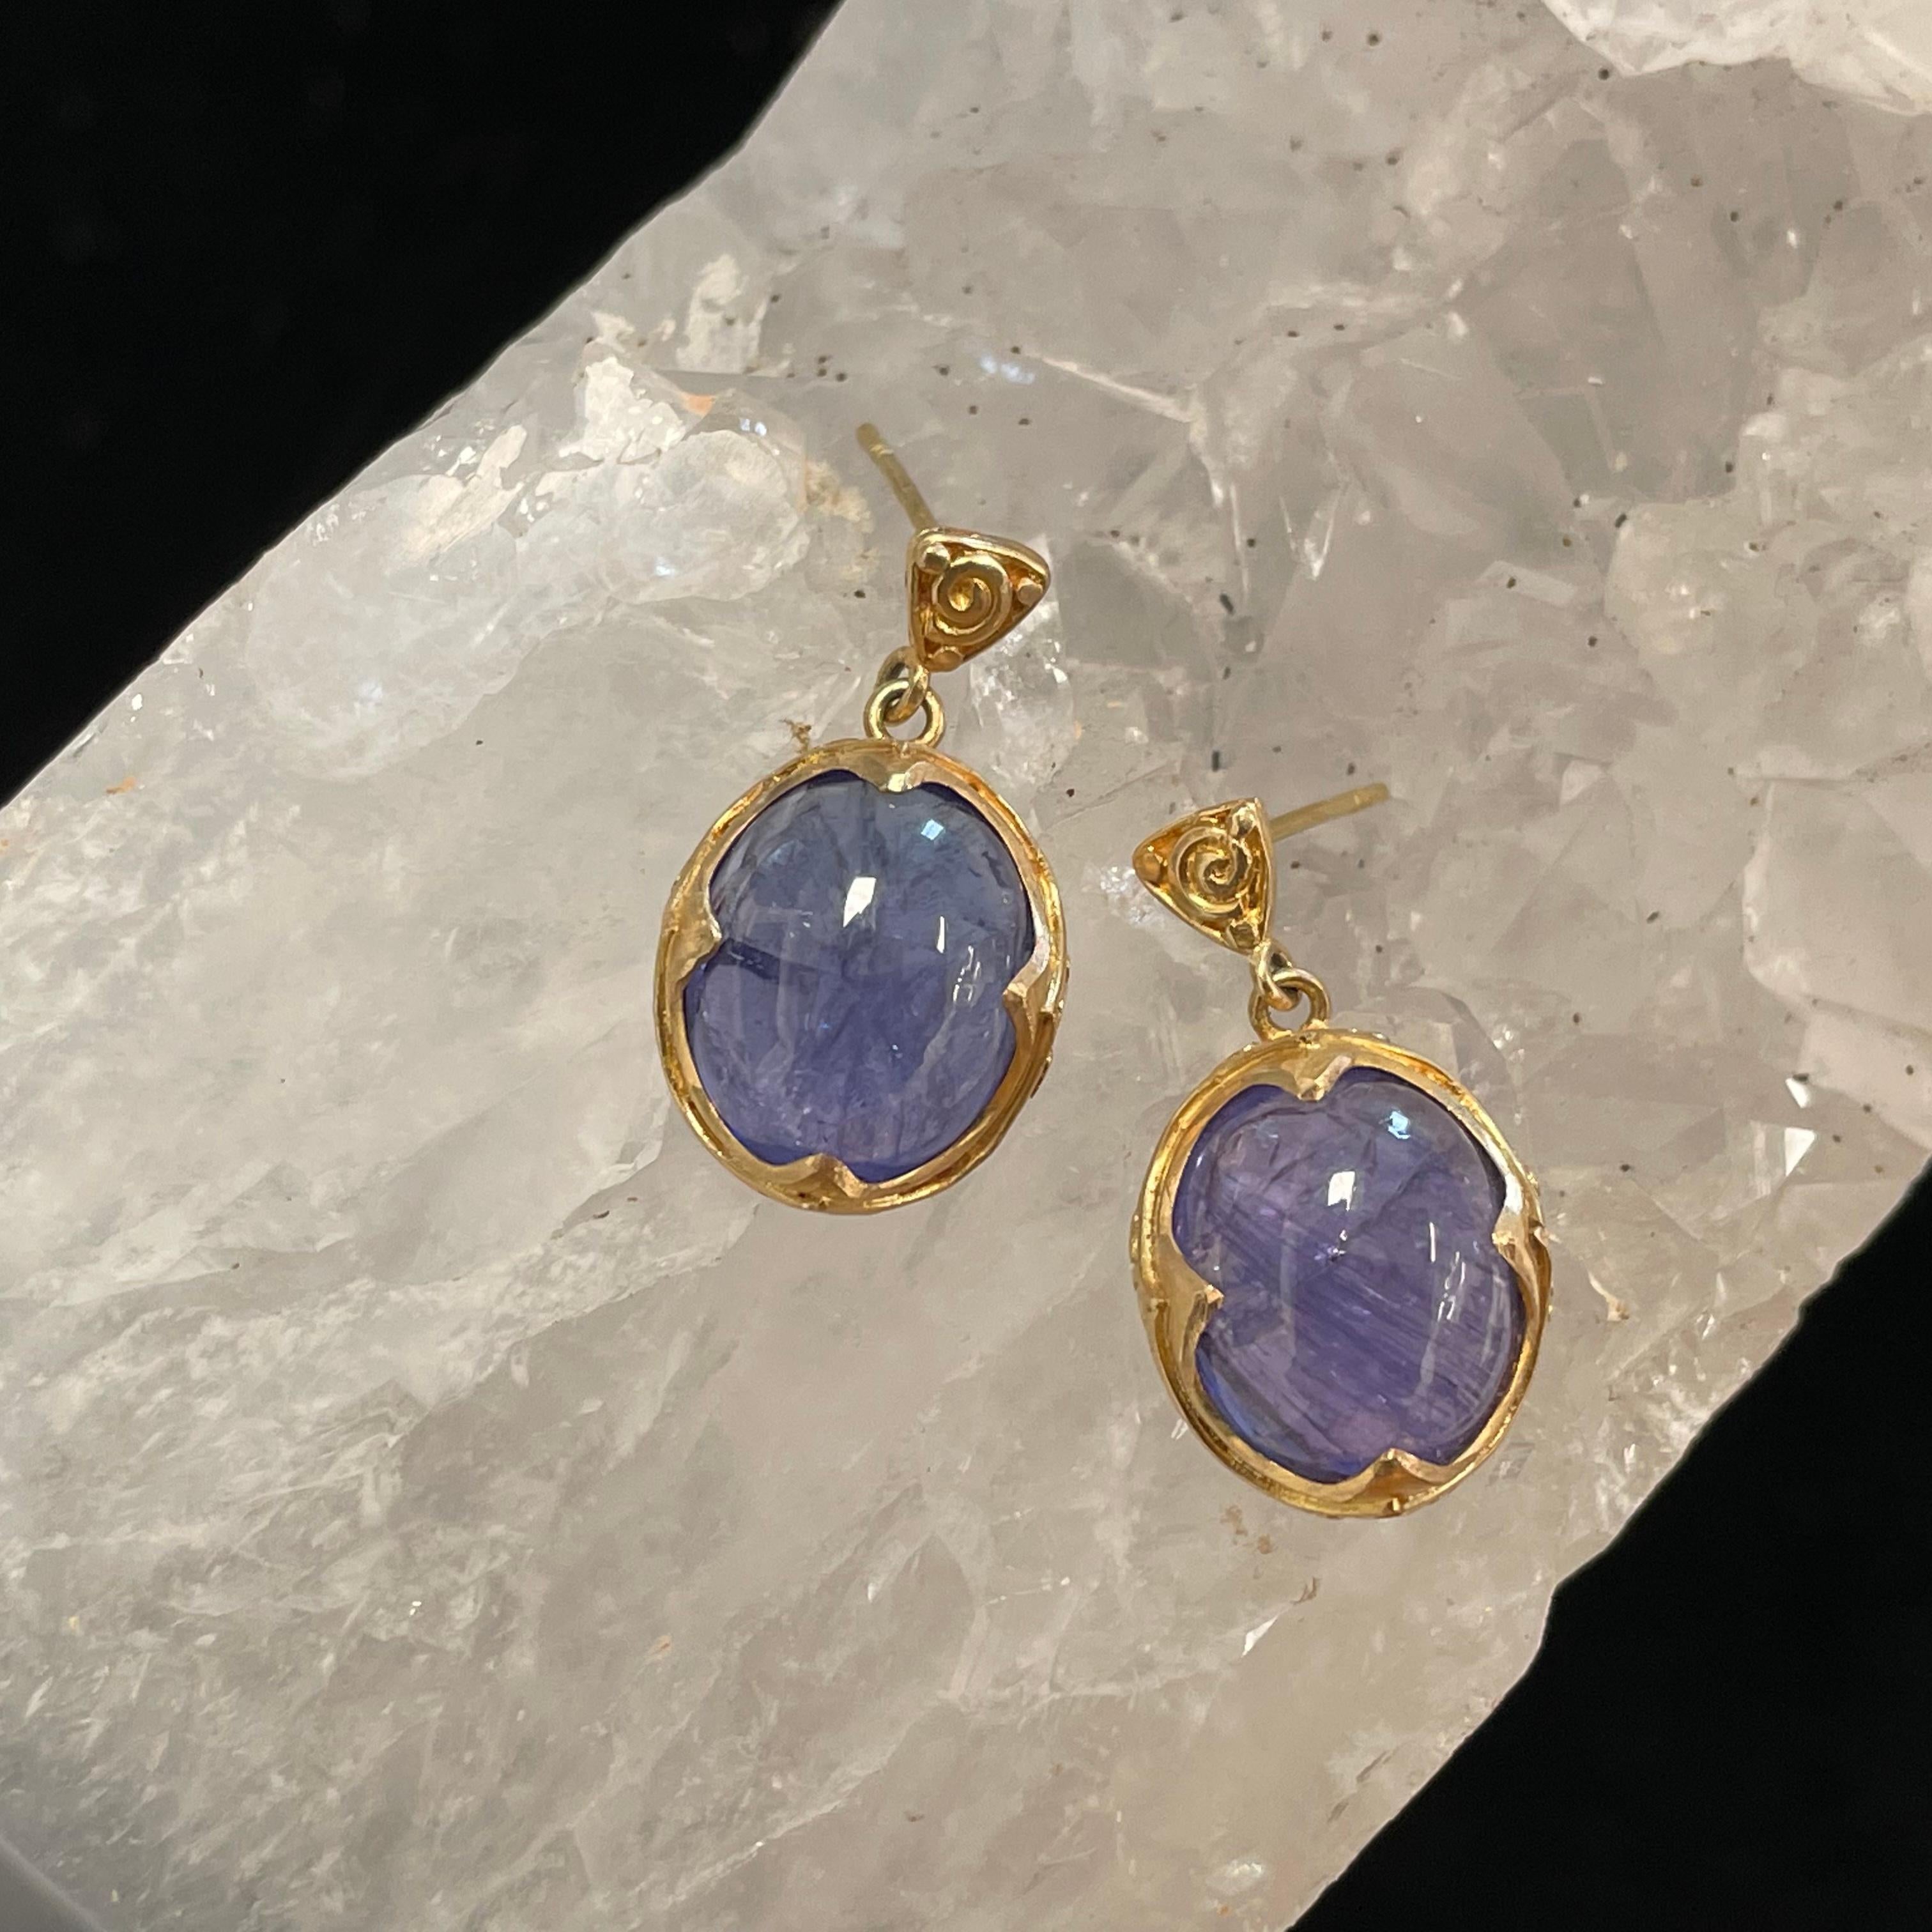 Two 10x12 mm Tanzanite cabochons are set in signature ancient-inspired 